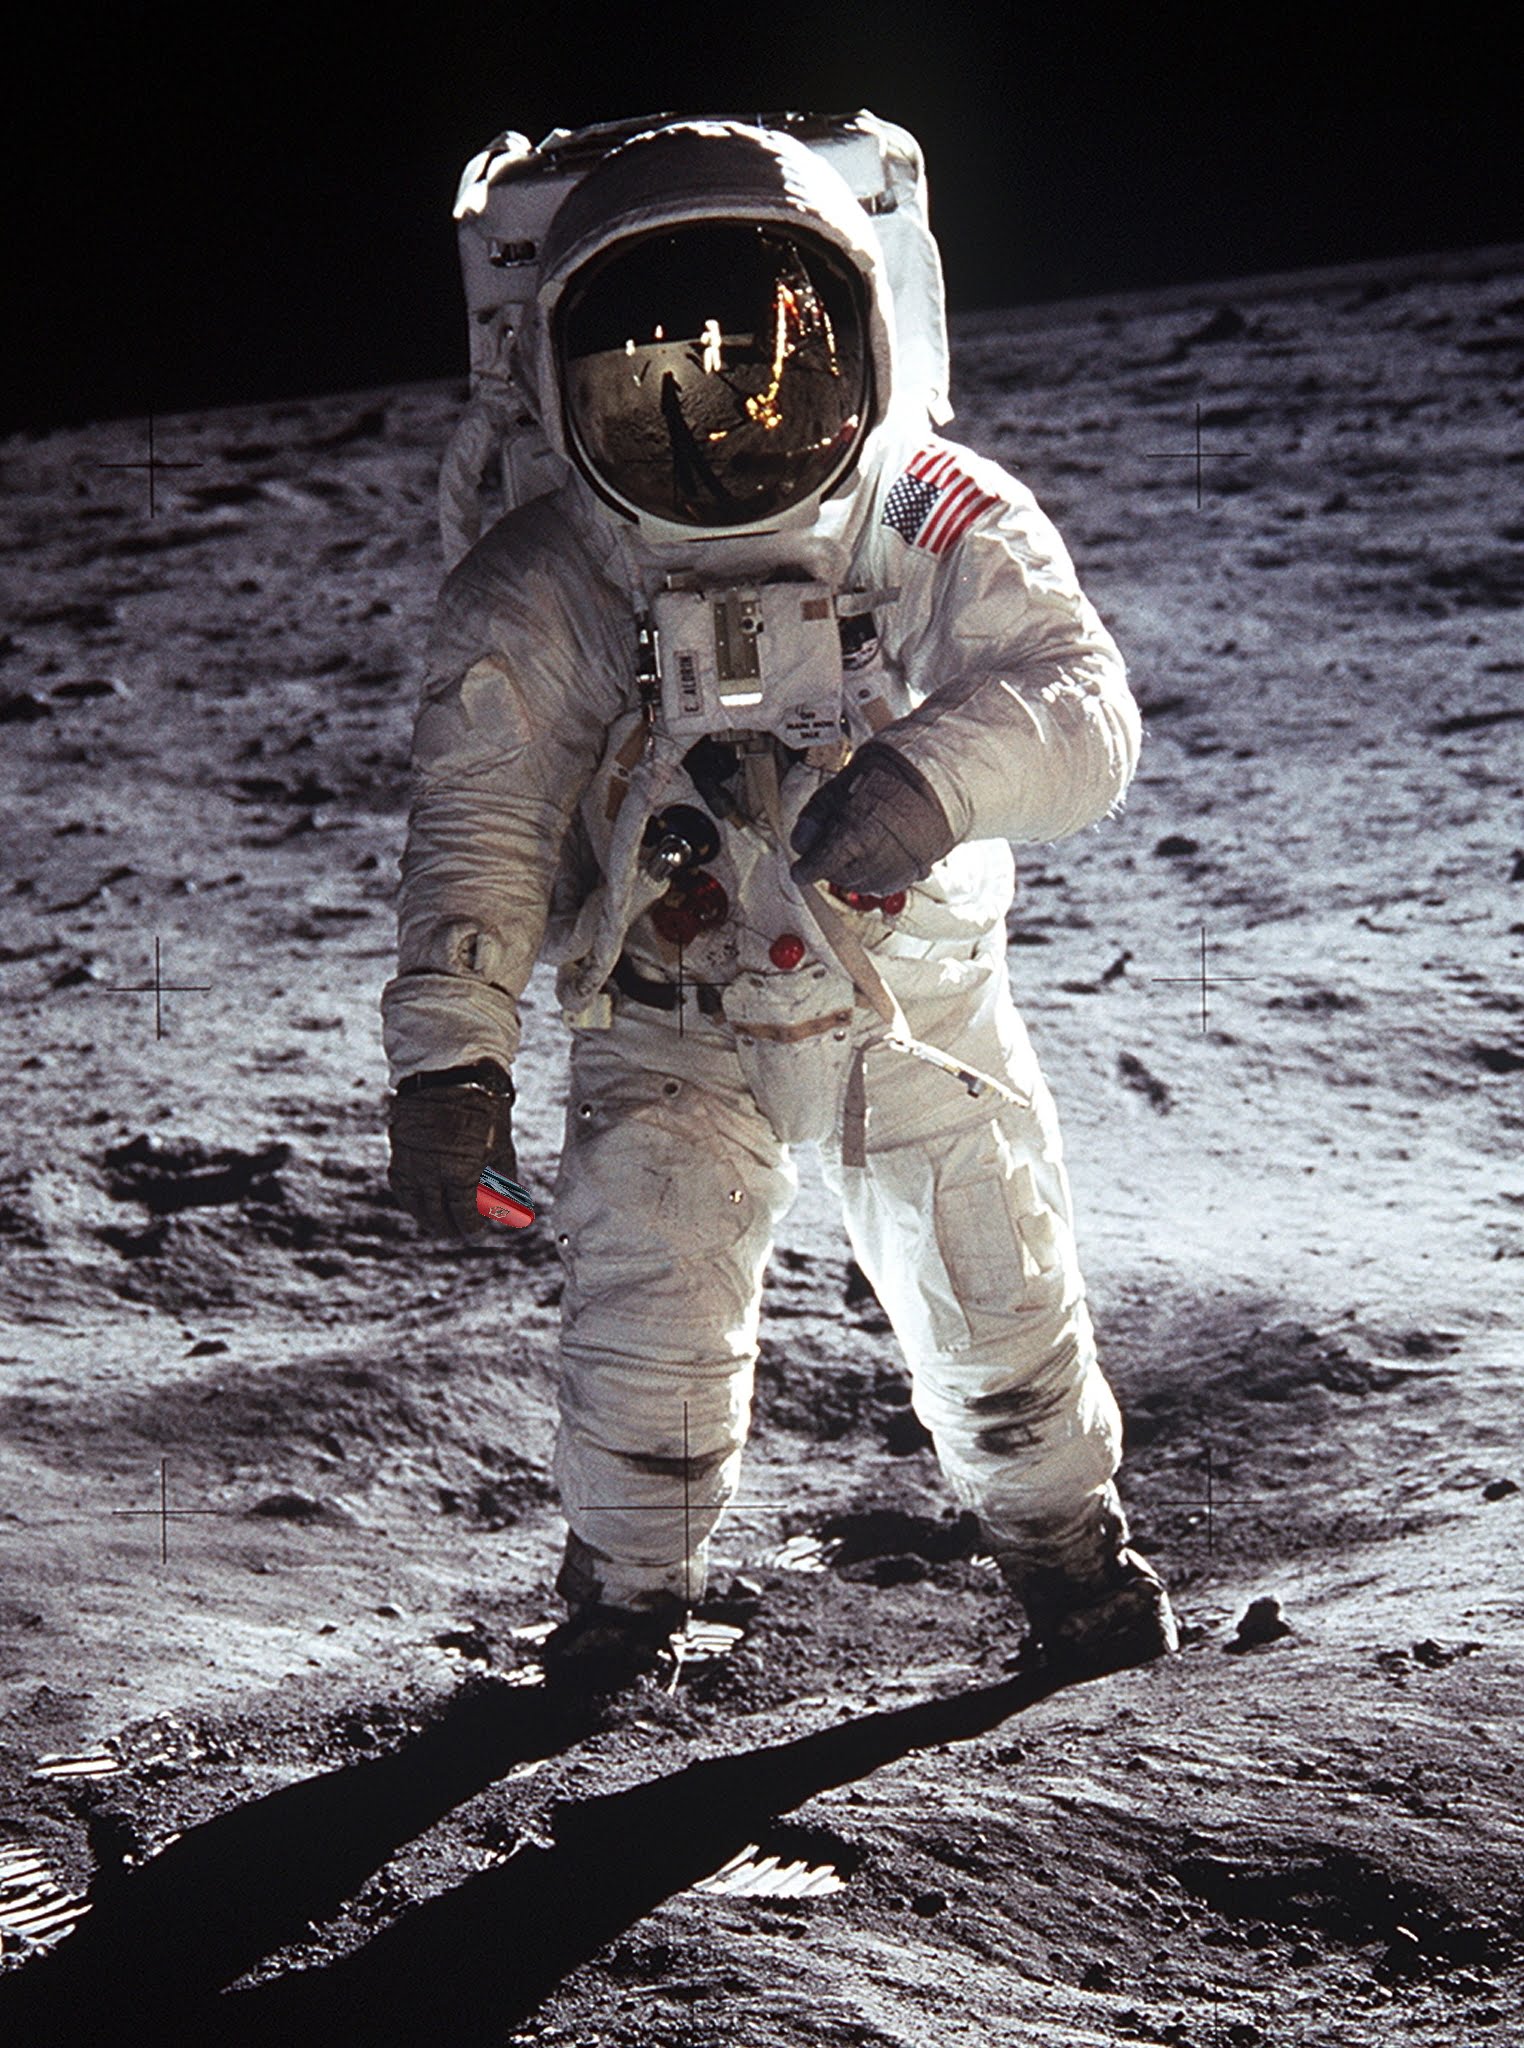 Aldrin on the moon during the Apollo 11 mission. Courtesy of NASA